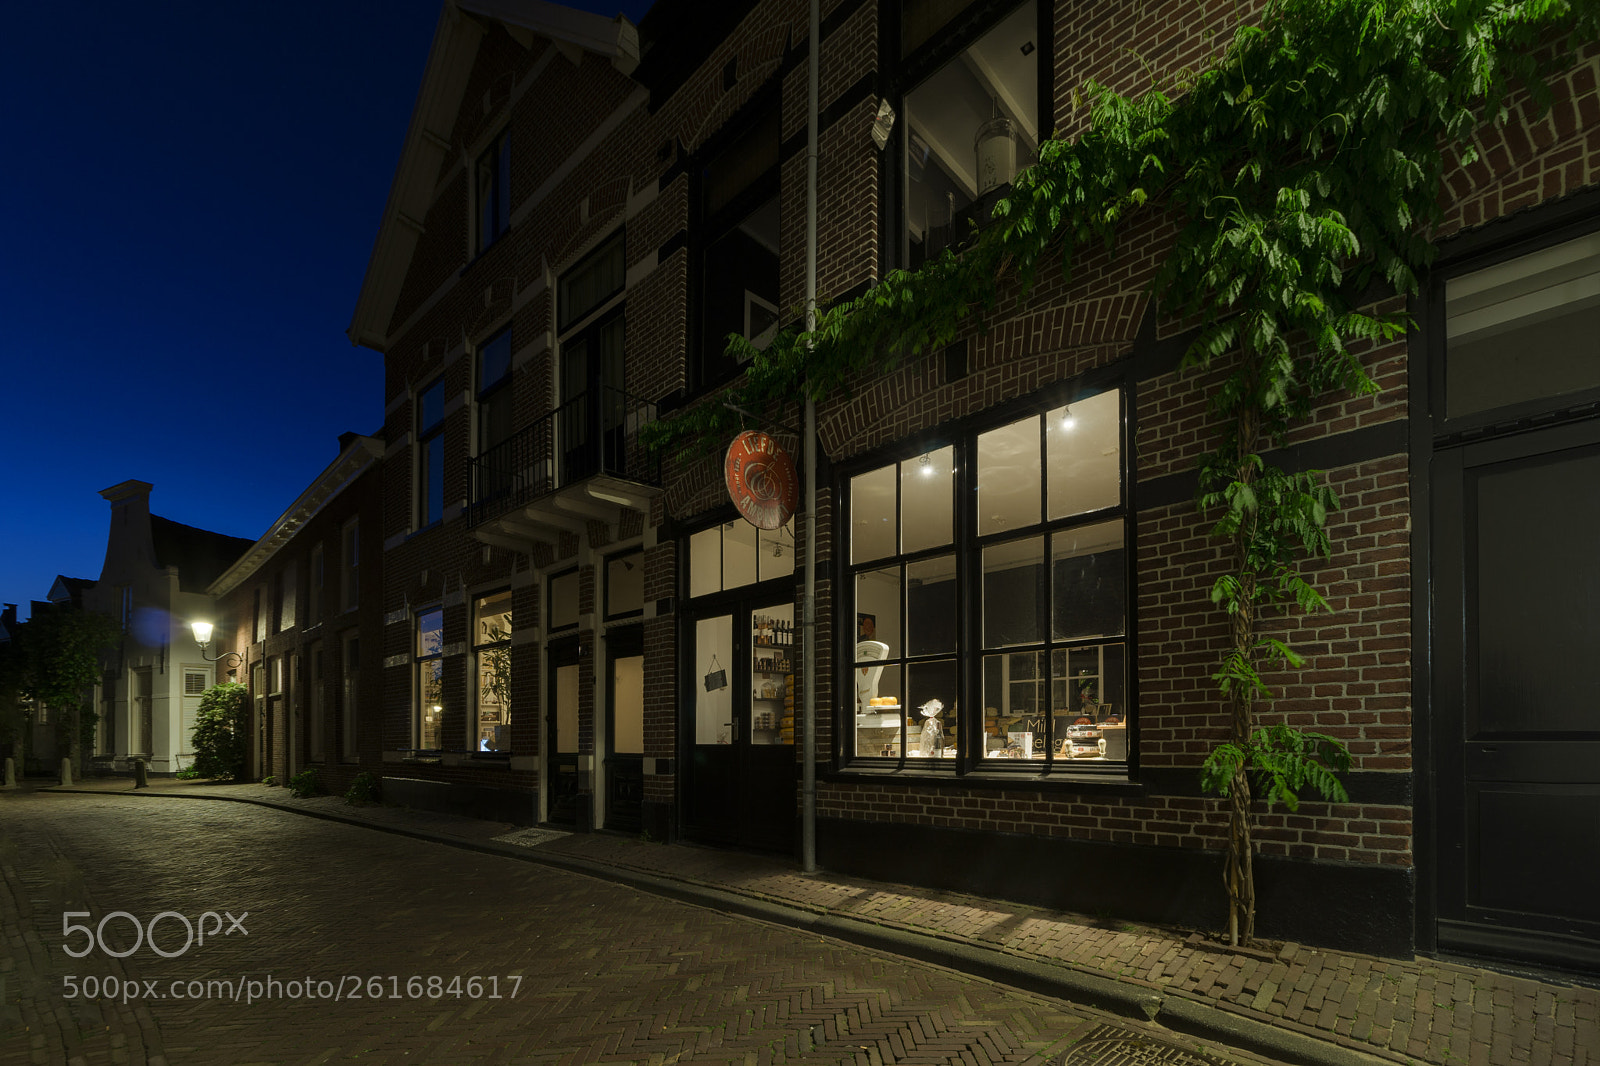 Sony a6000 sample photo. Cheese shop blue hour photography